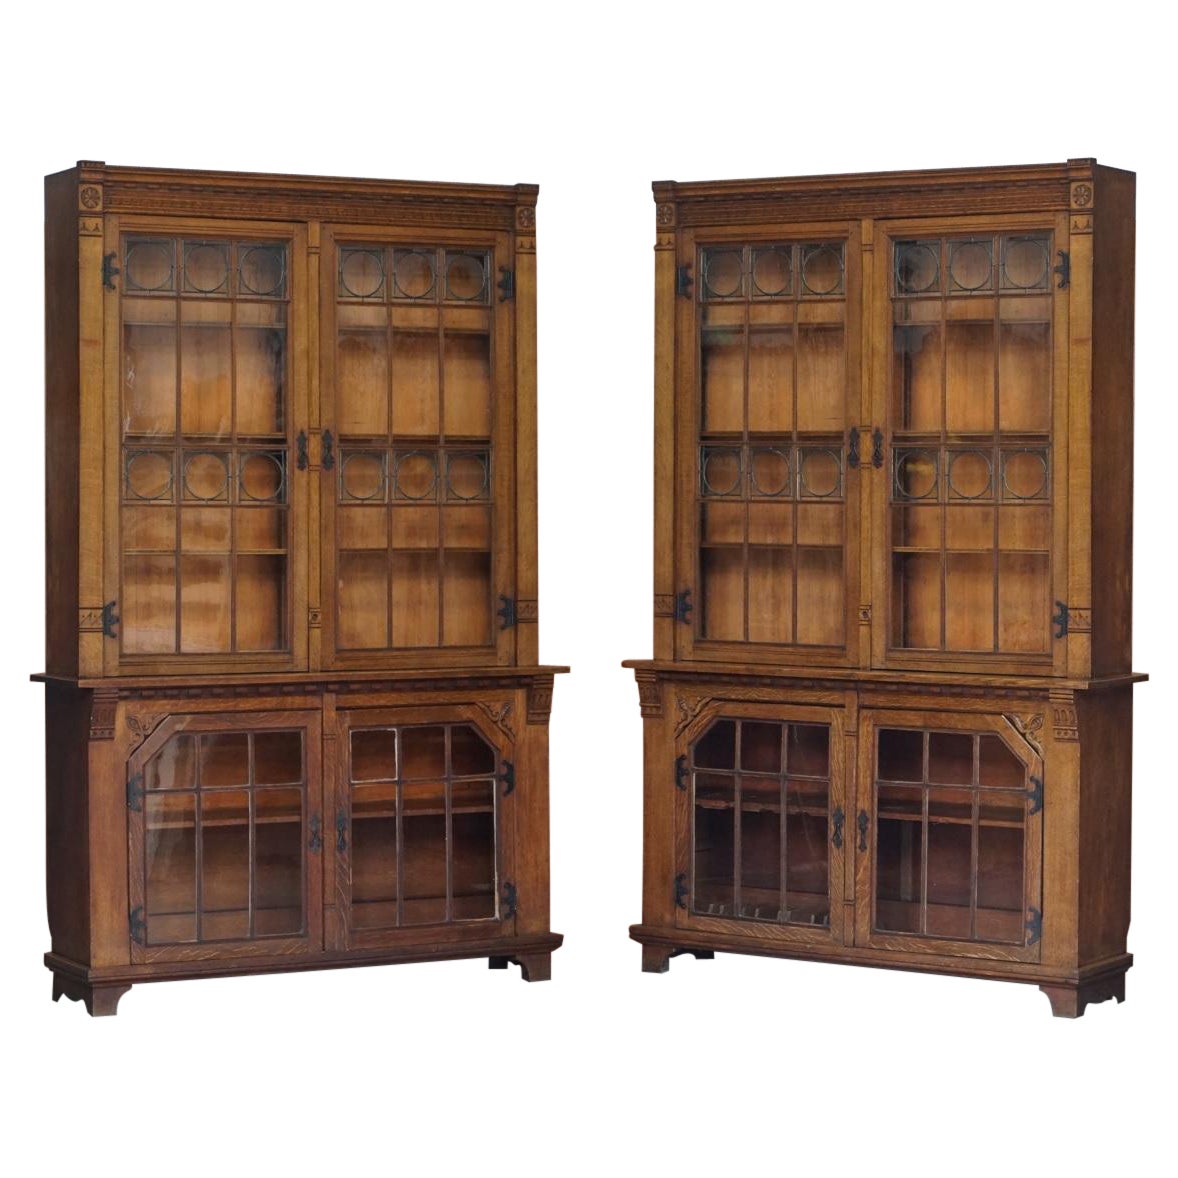 Stunning Pair of Huge Antique Victorian Oak Library Bookcases Leaded Glass Doors